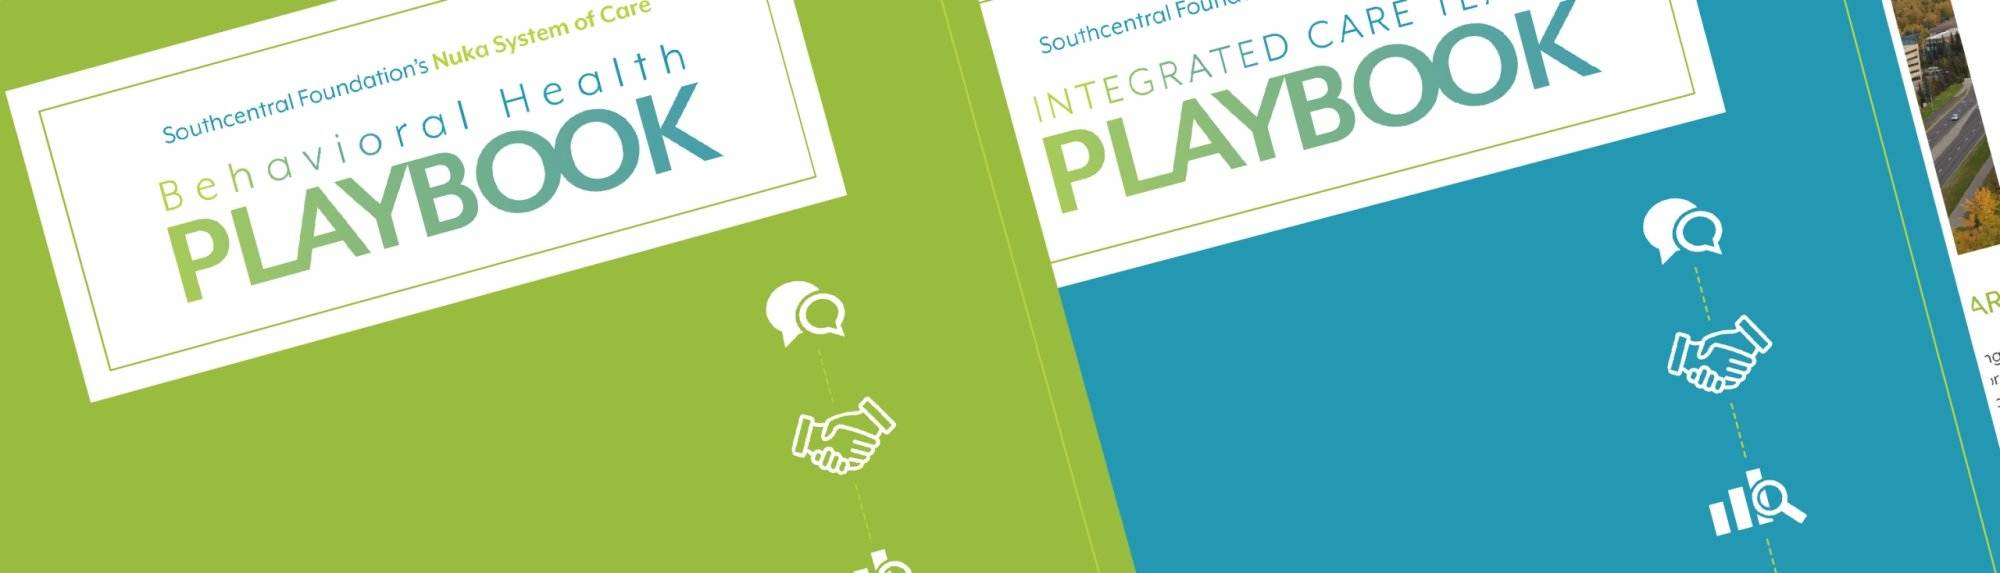 Southcentral Foundation’s Behavioral Health Integration Playbook